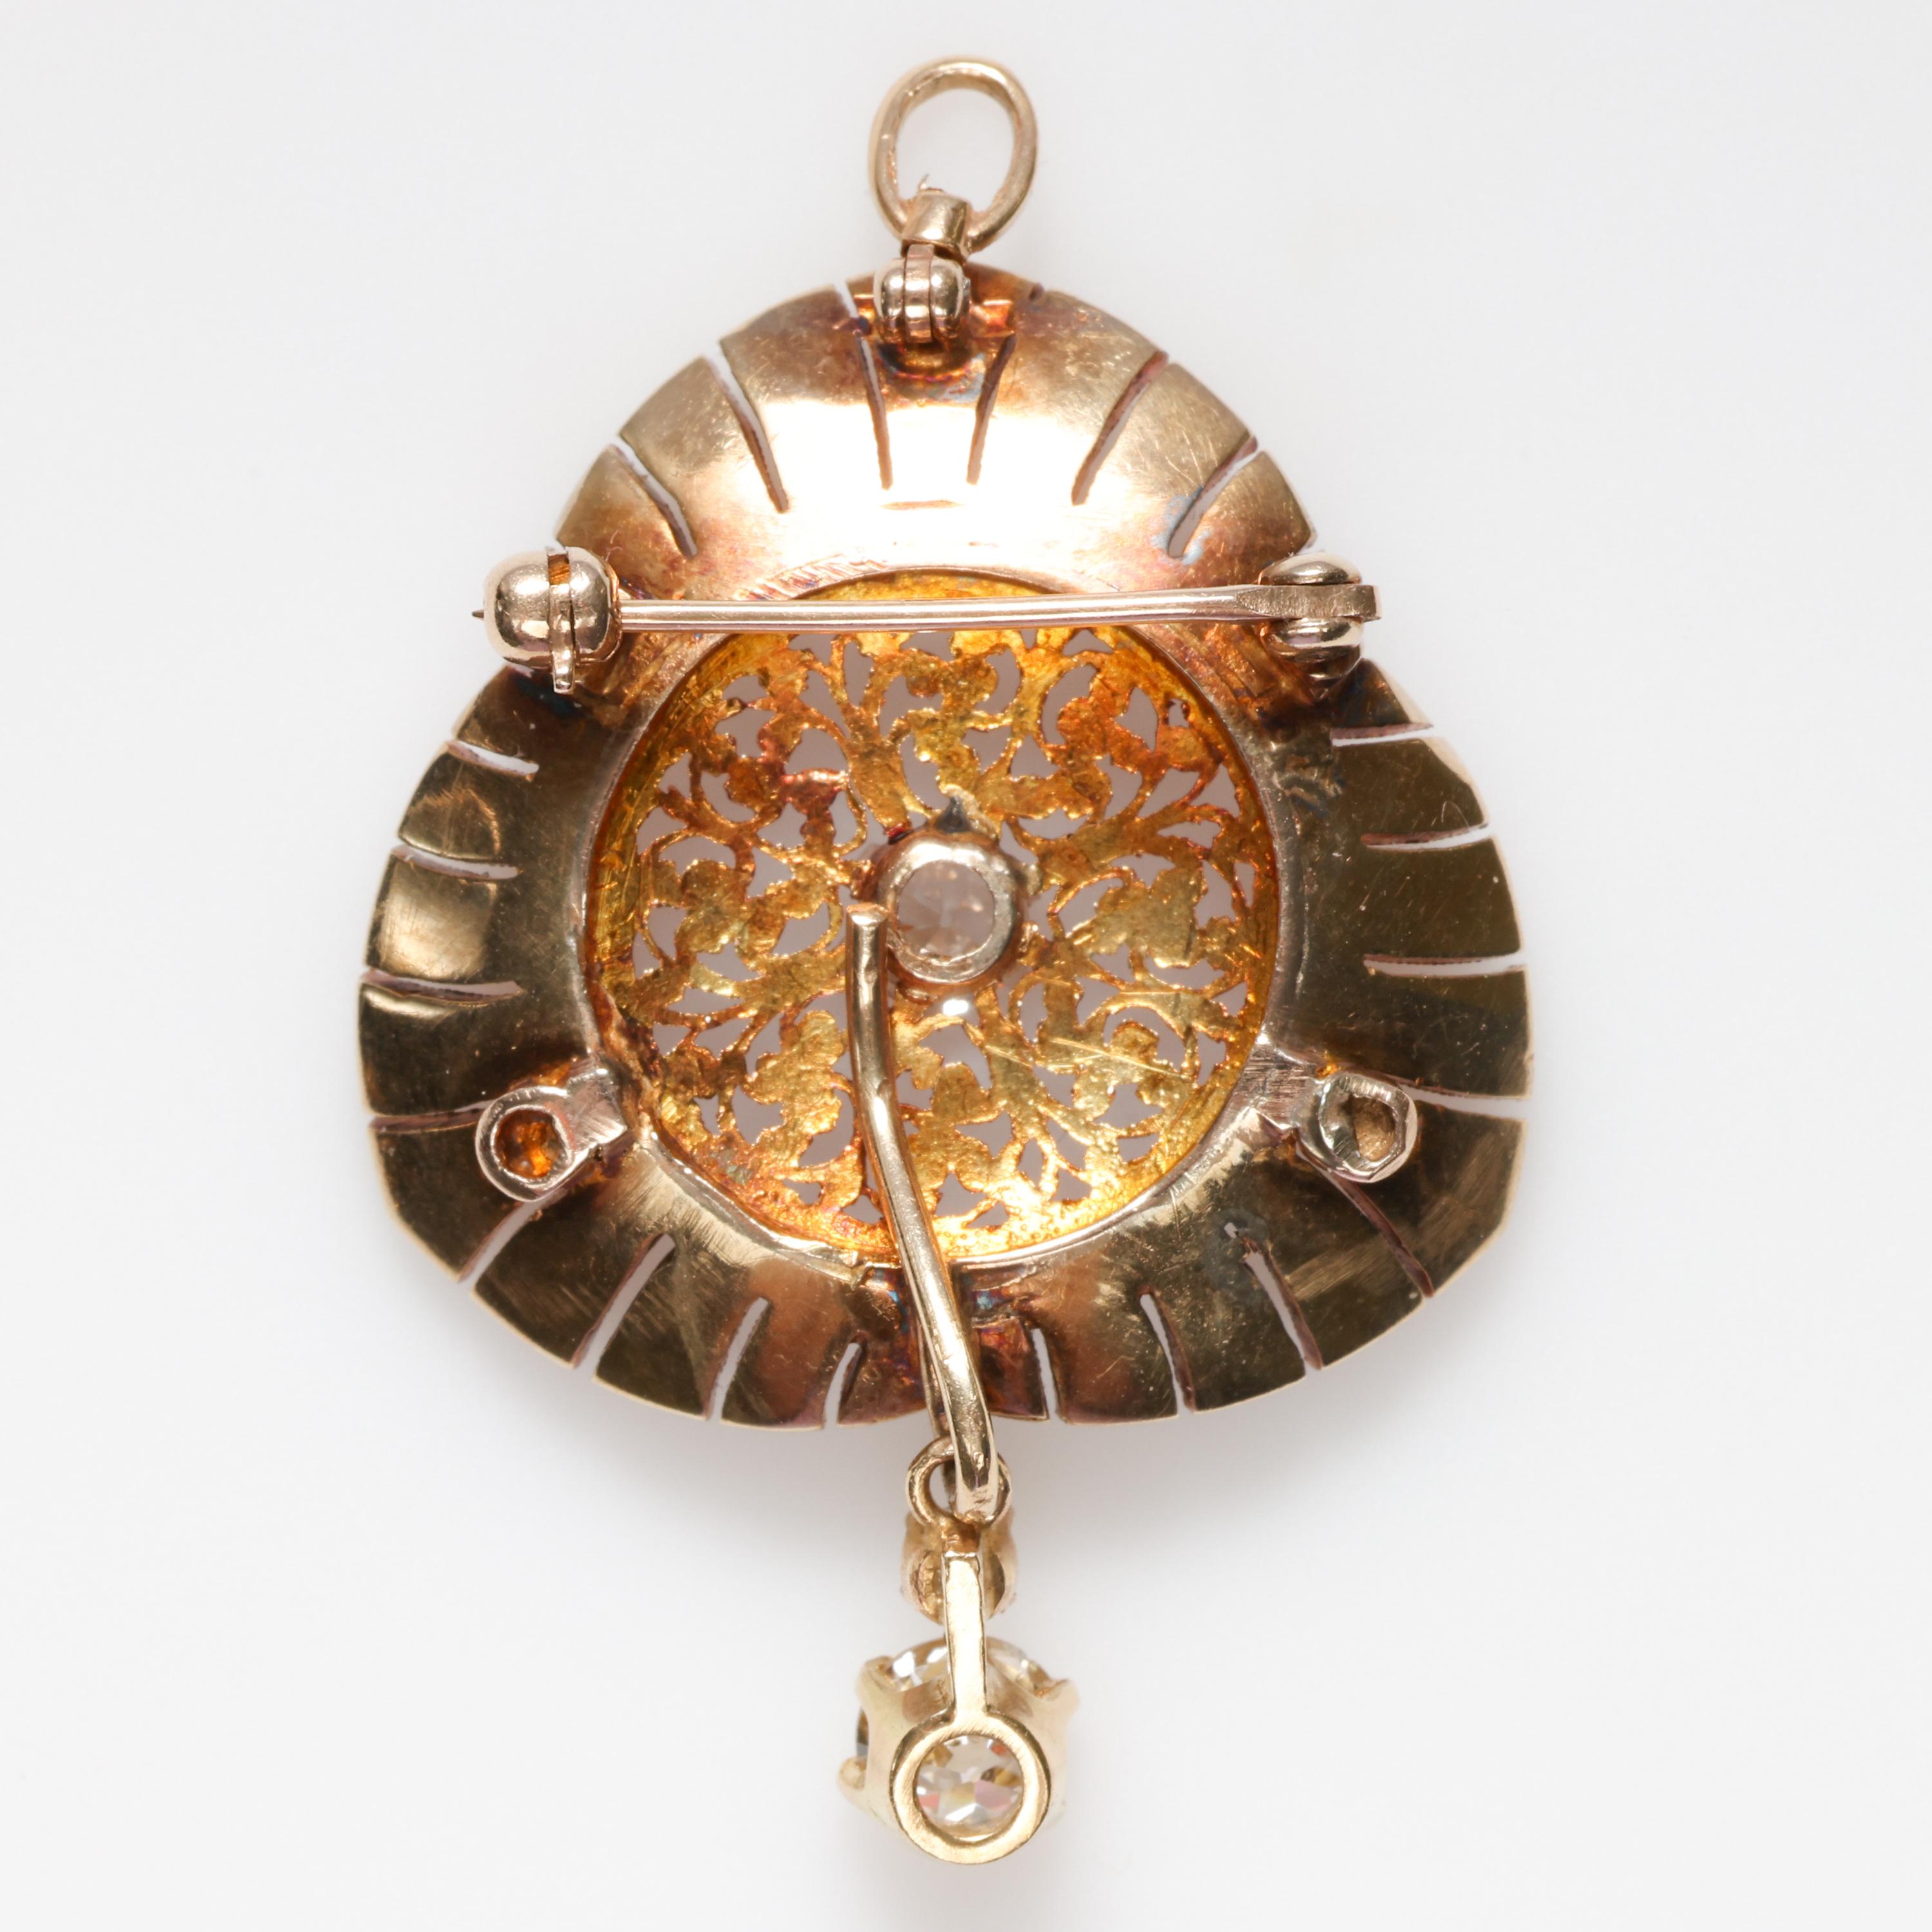 Ornate, exuberant goldsmithing showcases about 1.20 carats of 42 glittering antique rose-cut diamonds and approximately .85 carats of Old European cut stones in this magnificent, baroque-revival pendant /brooch from around 1940.  The total diamond